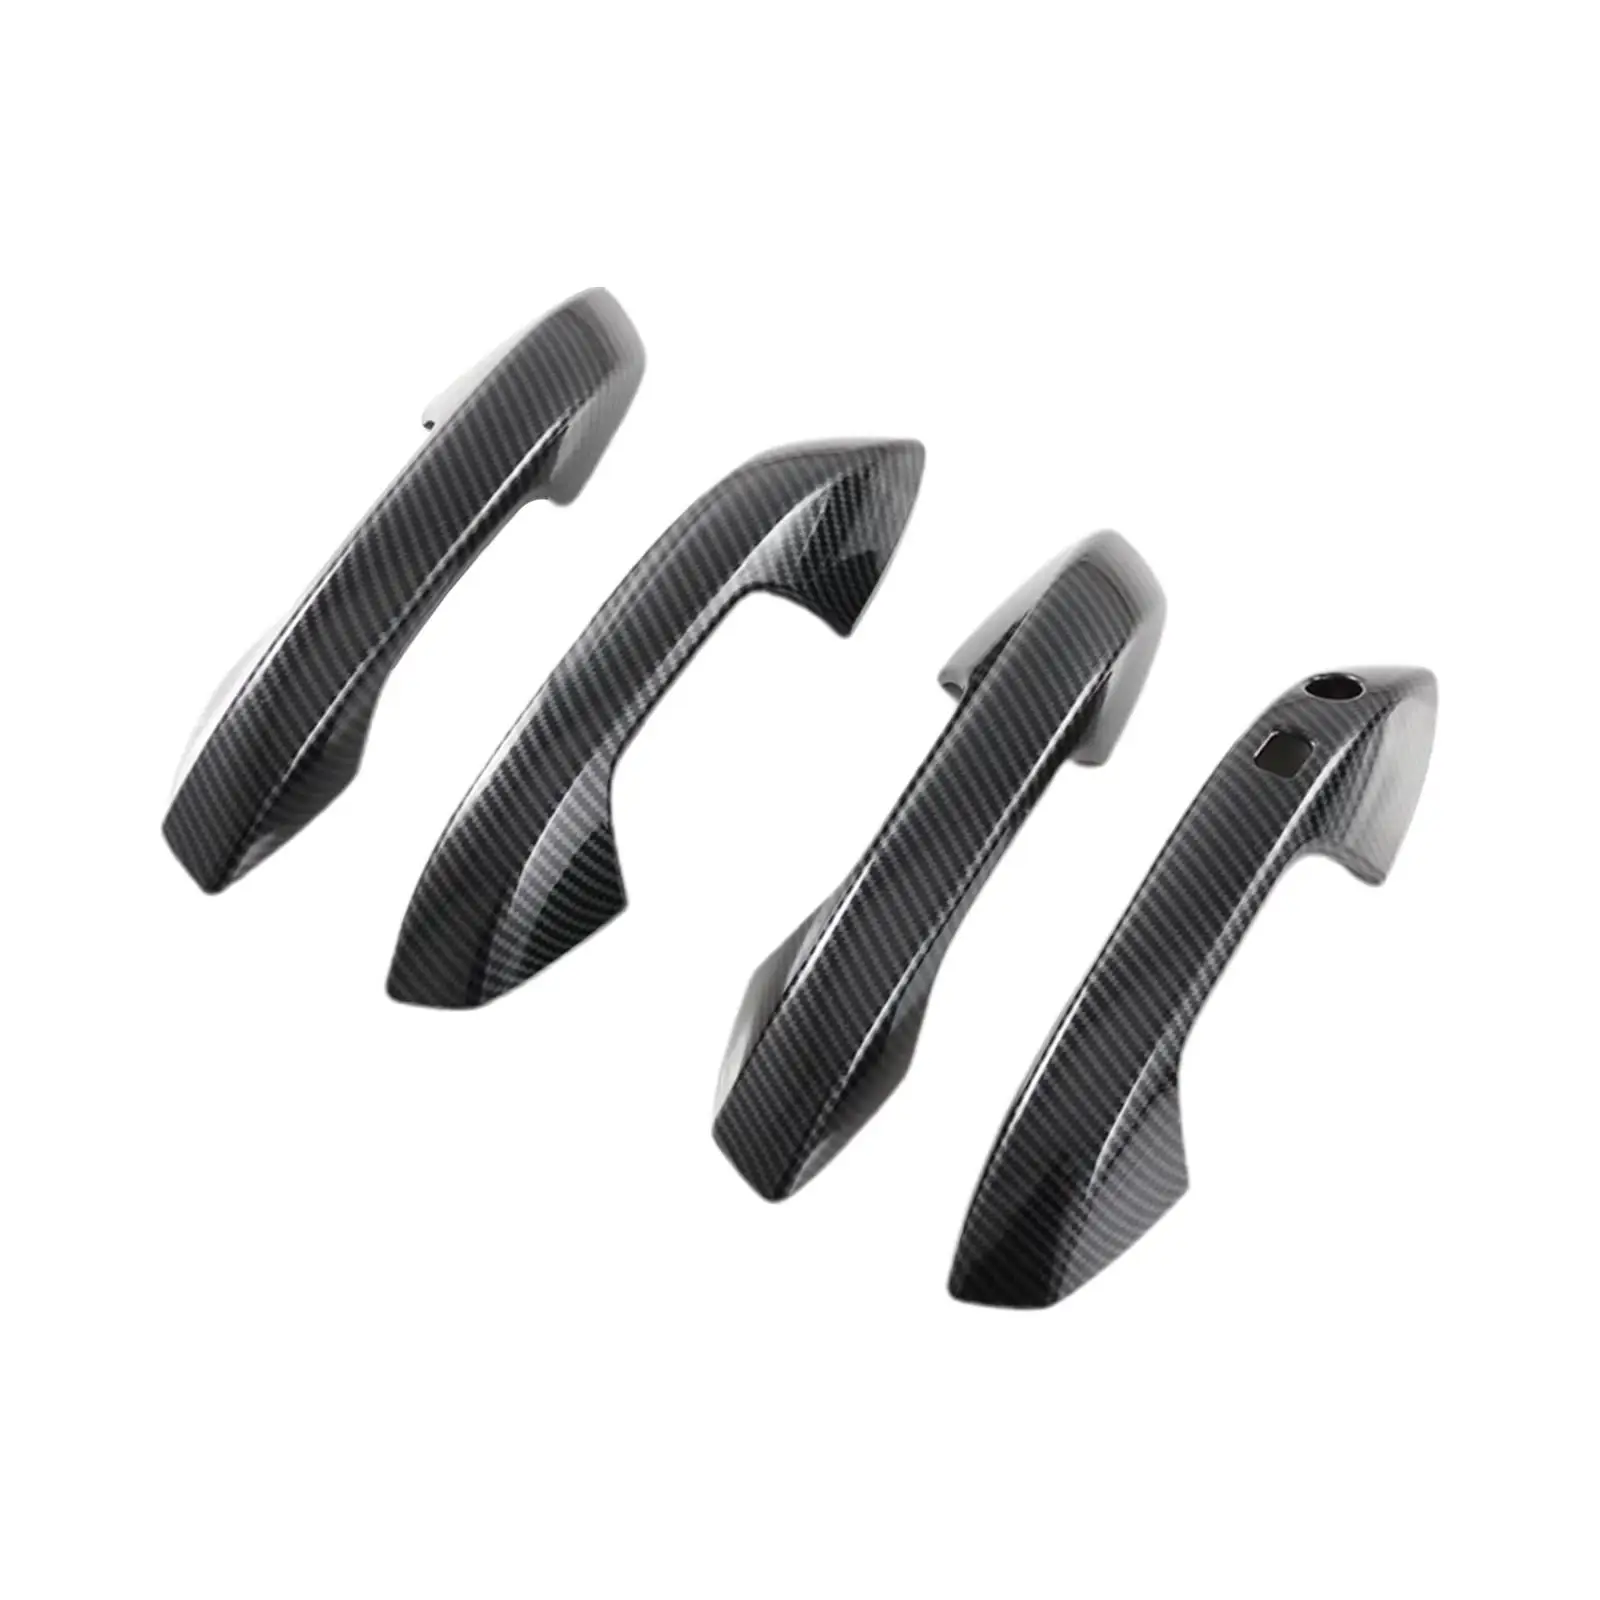 4Pcs Car Door Handle Cover Protector Scratch Protection Decoration for Byd Atto 3 Yuan Plus Accessories Upgrade Appearance